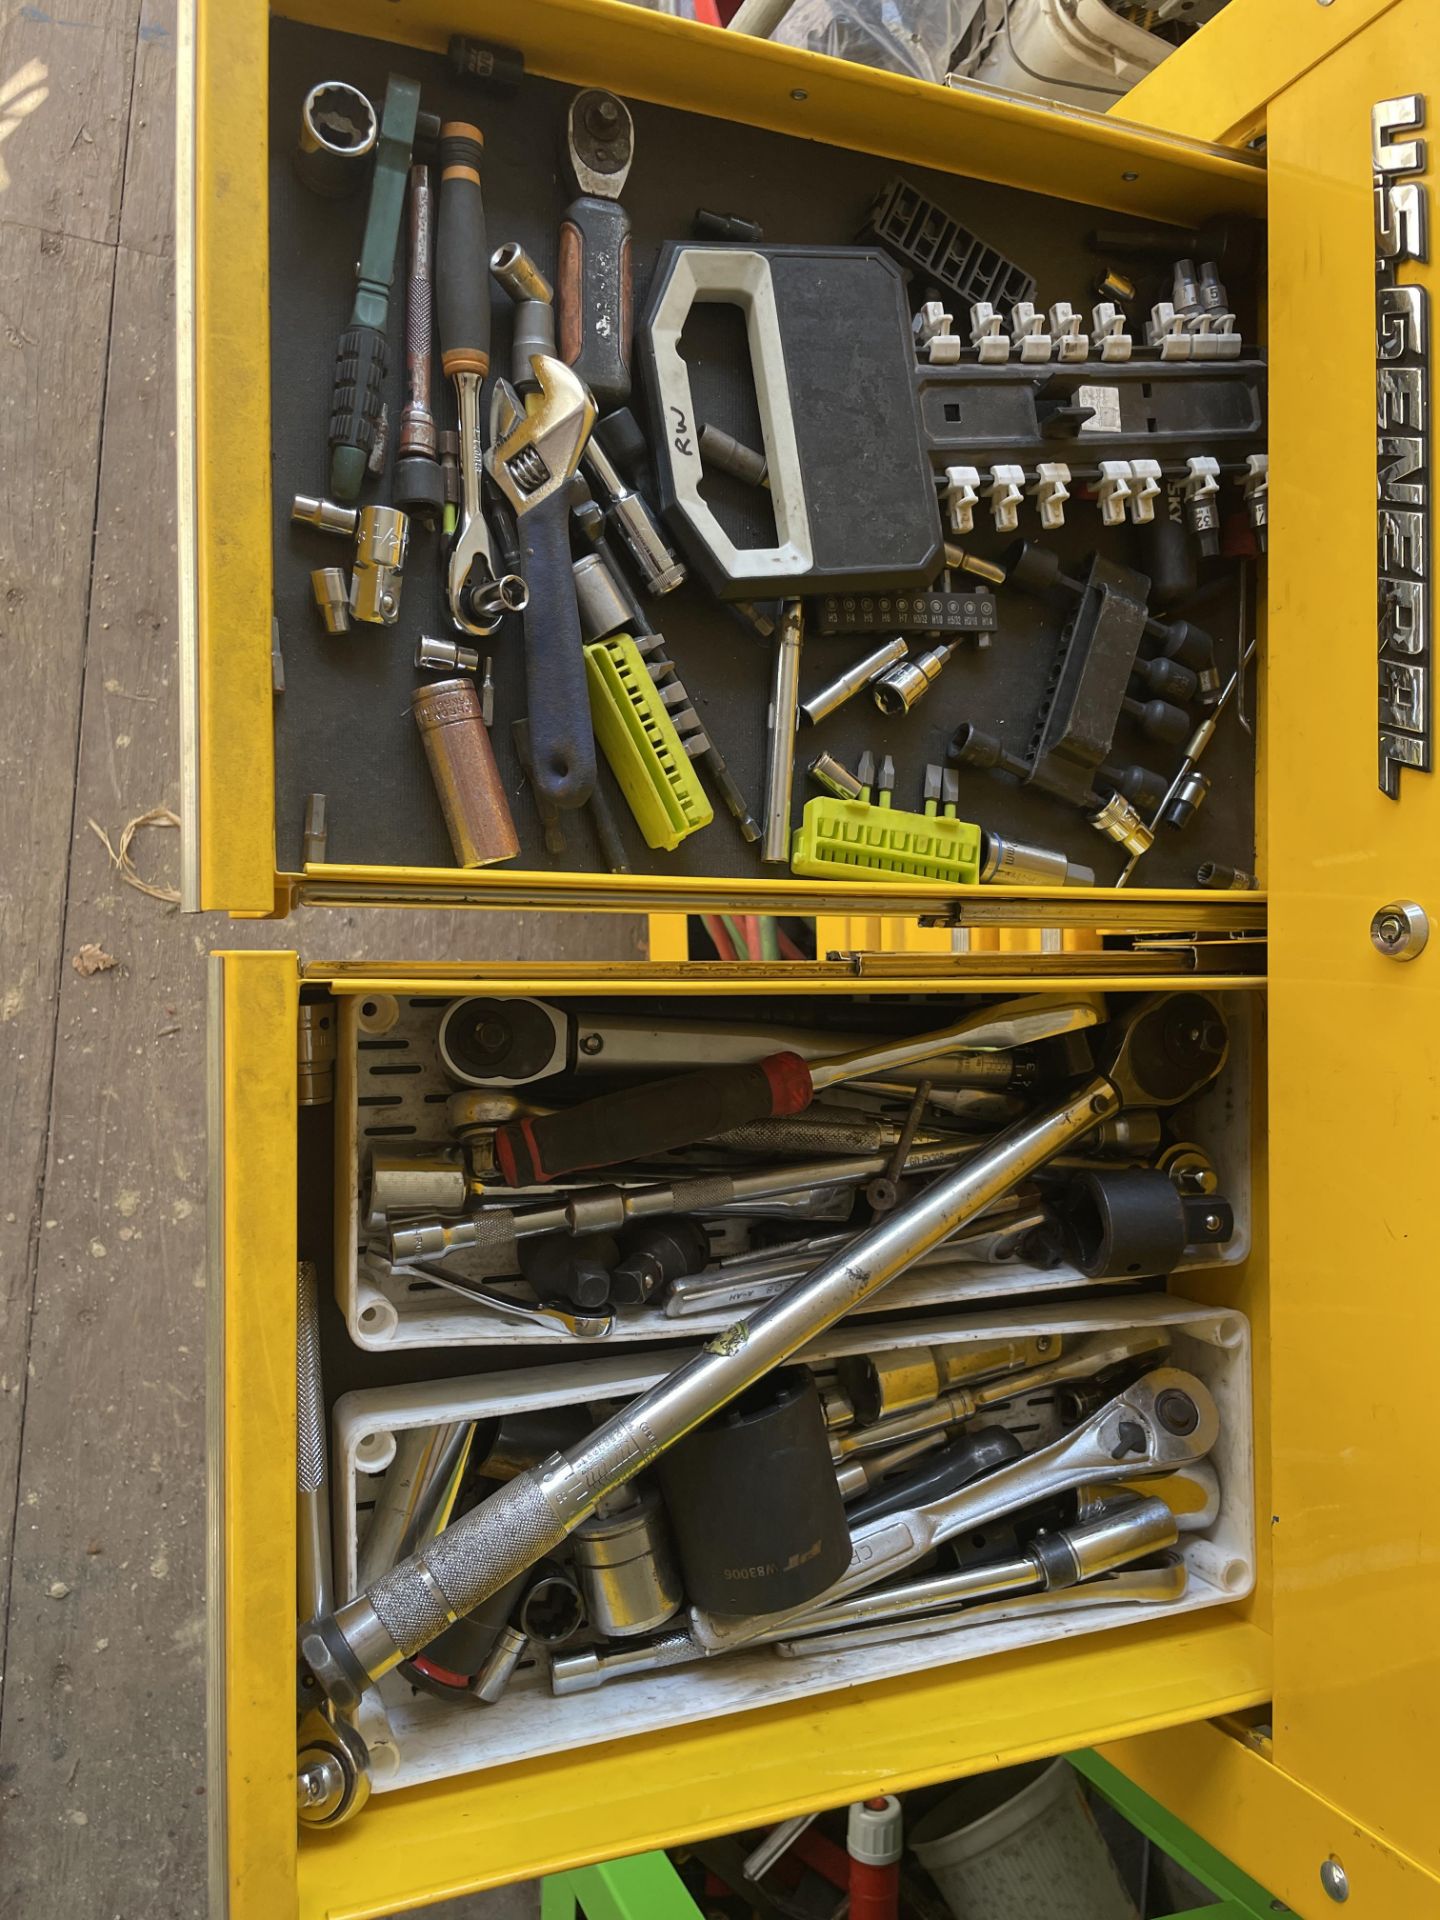 US General Port 5 Drawer Tool Box, Contents Included (Yellow) - Image 3 of 5